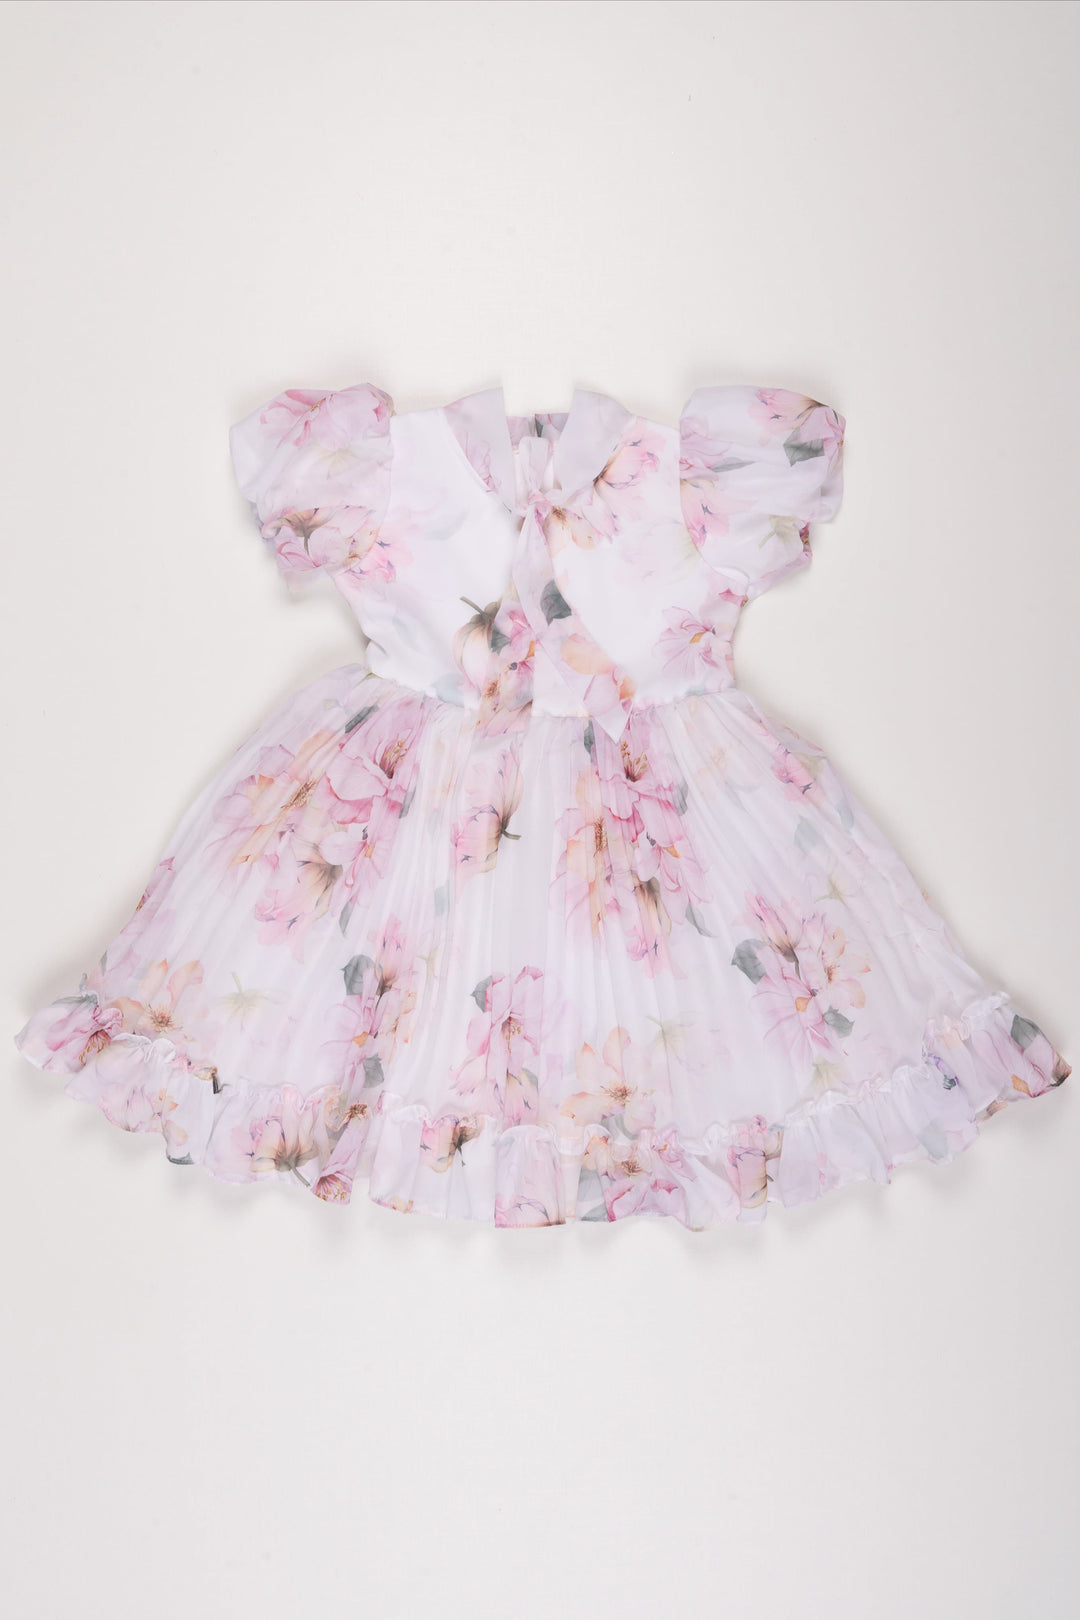 The Nesavu Girls Fancy Frock Soft Floral Elegance with Sheer Overlay Frock for Girls Nesavu 16 (1Y) / White GFC1185B-16 Girls Ivory Floral Sheer Dress | Delicate Flower Print Dress for Special Occasions | The Nesavu